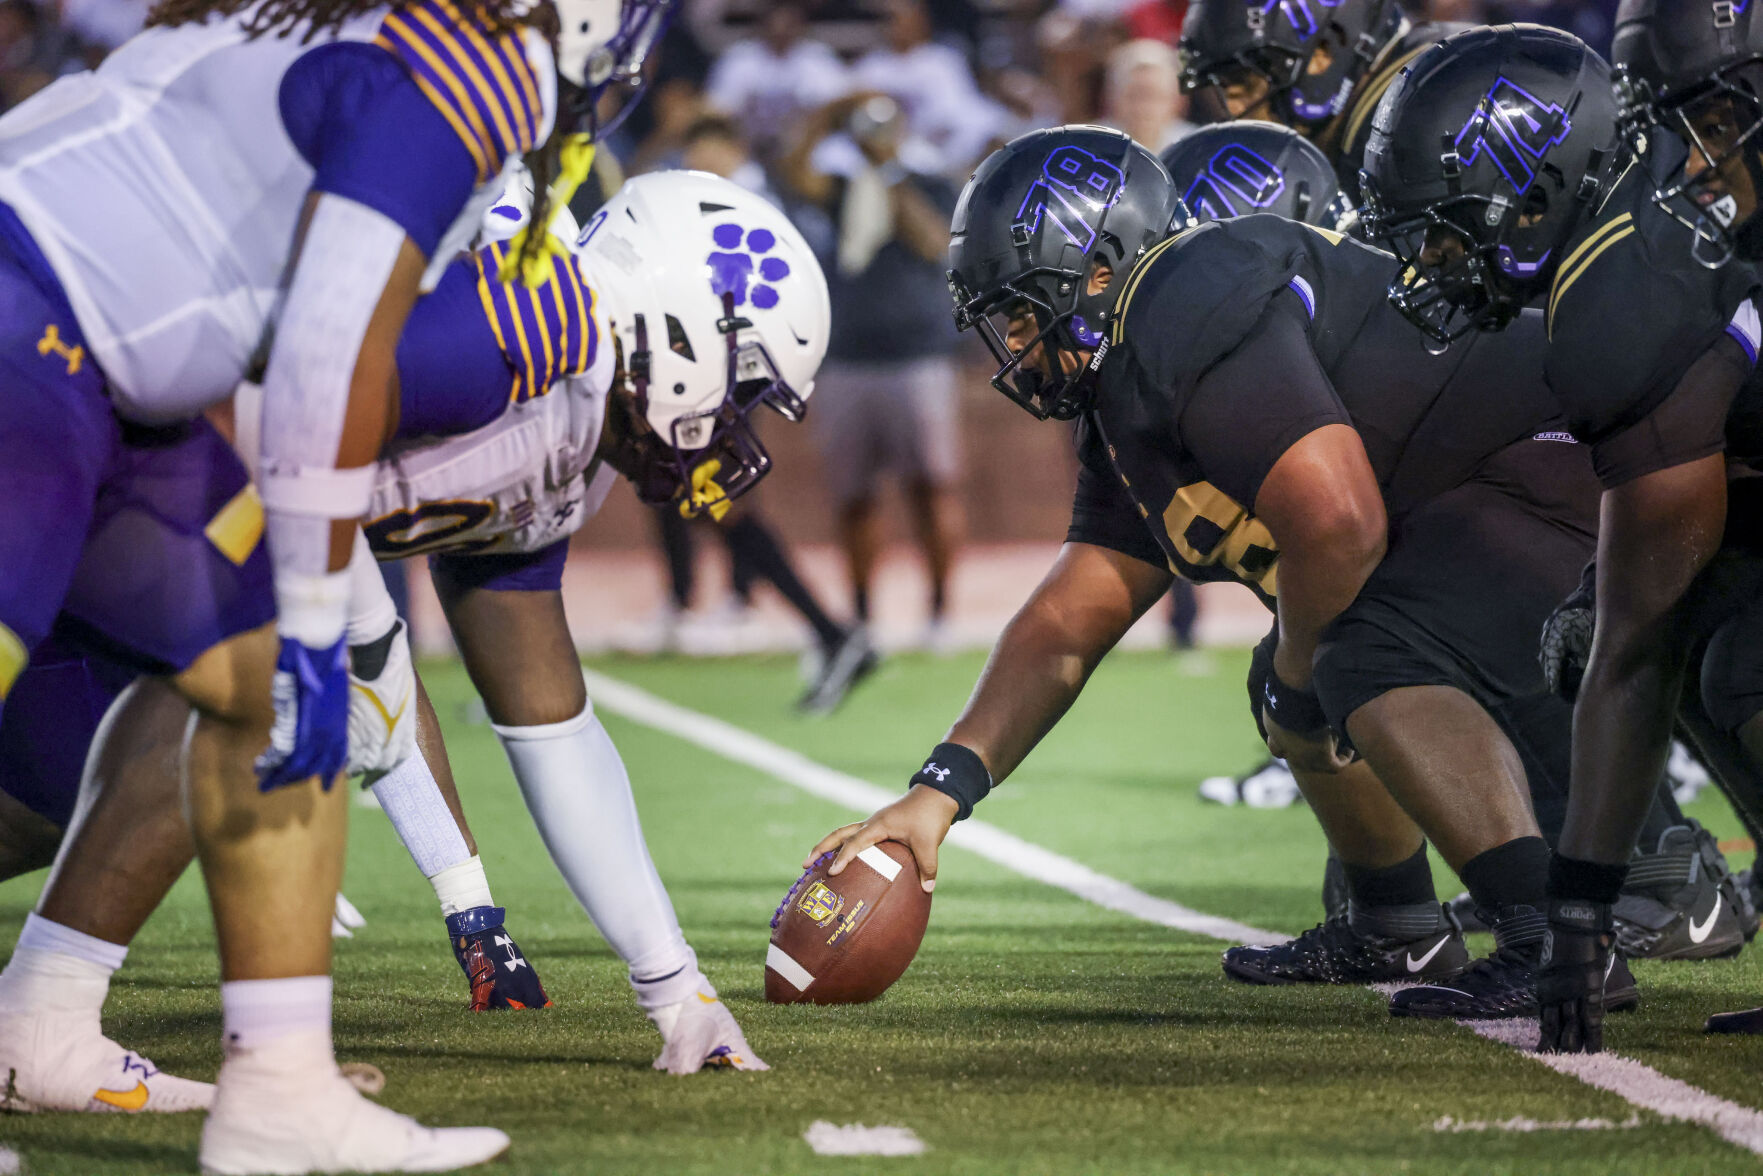 This Warren Easton offensive lineman is just the latest Division I recruit. Here’s his story.